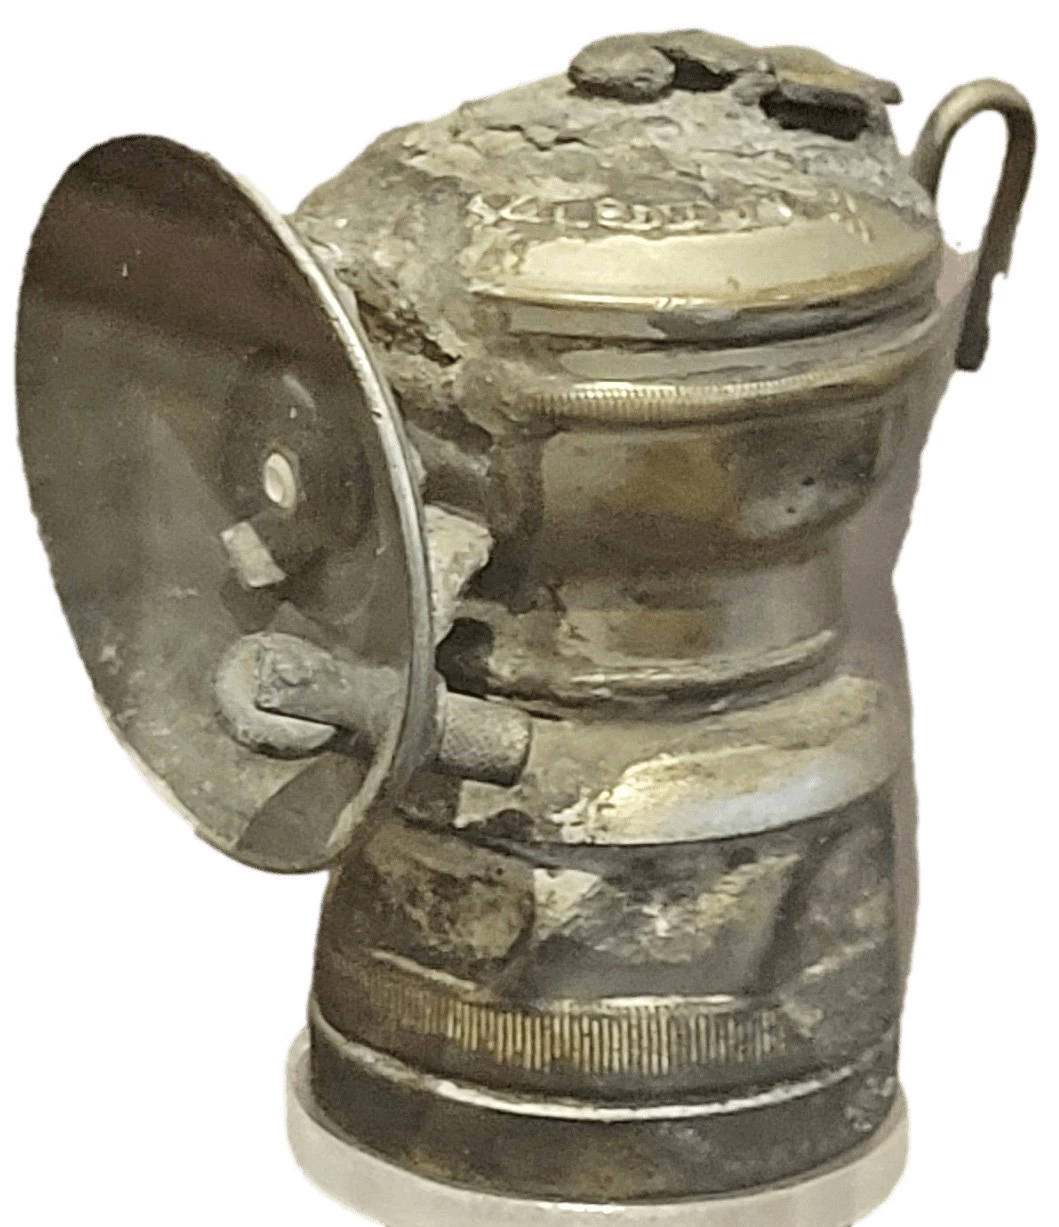 Cylindrical metal can with a disk on the left side and small hook on the right side.